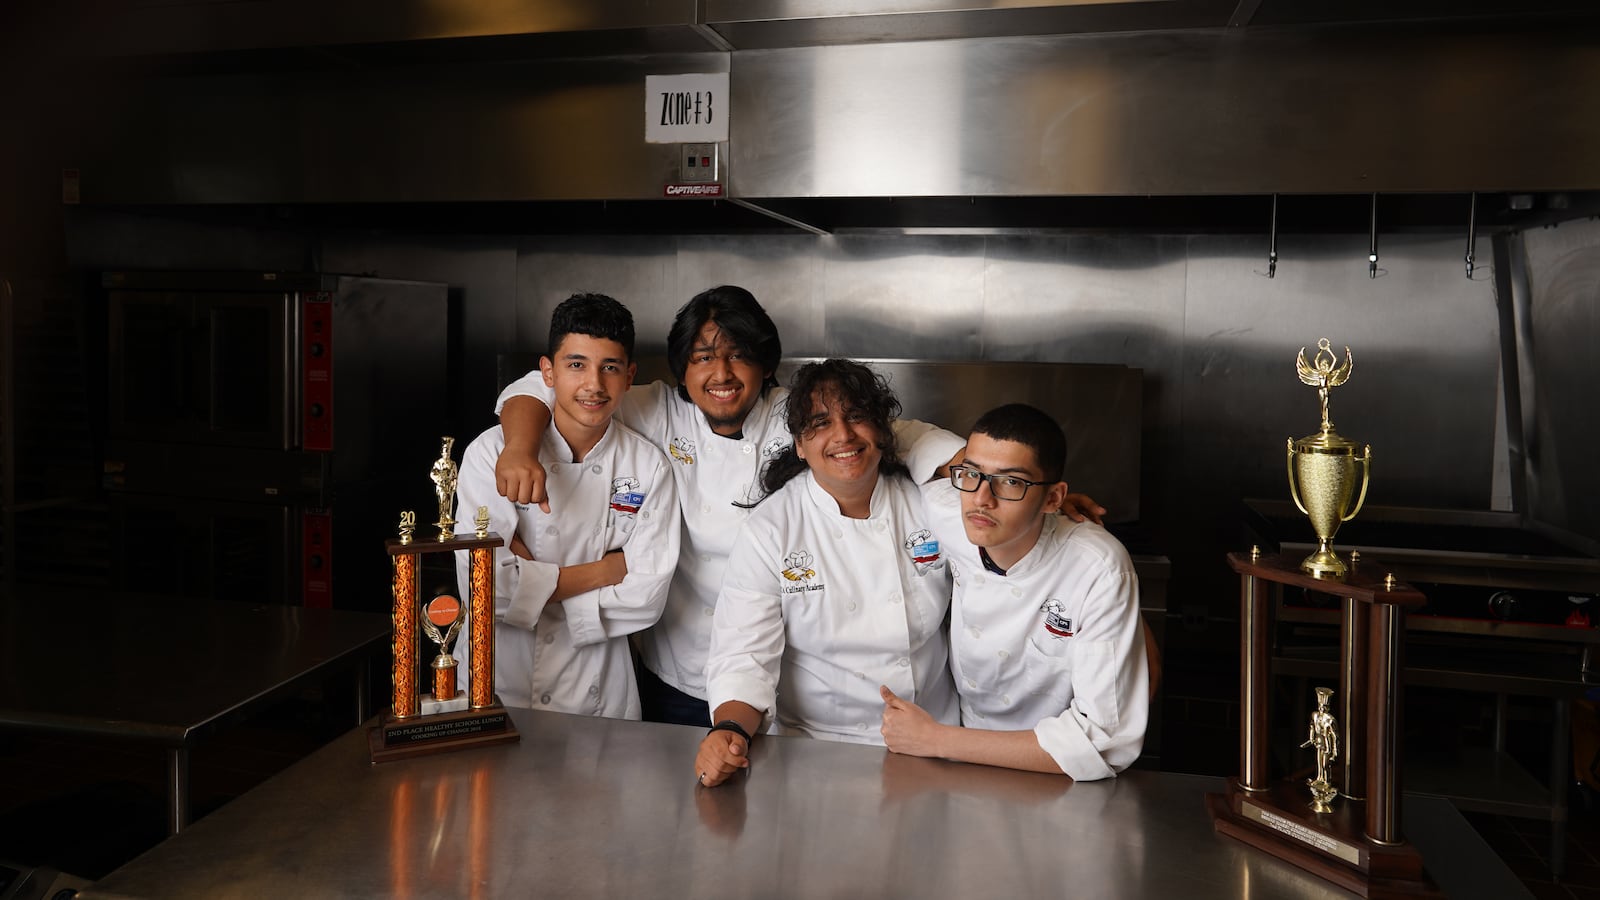 Four culinary students, all wearing white coats, pose on a prep station together with two large trophies.